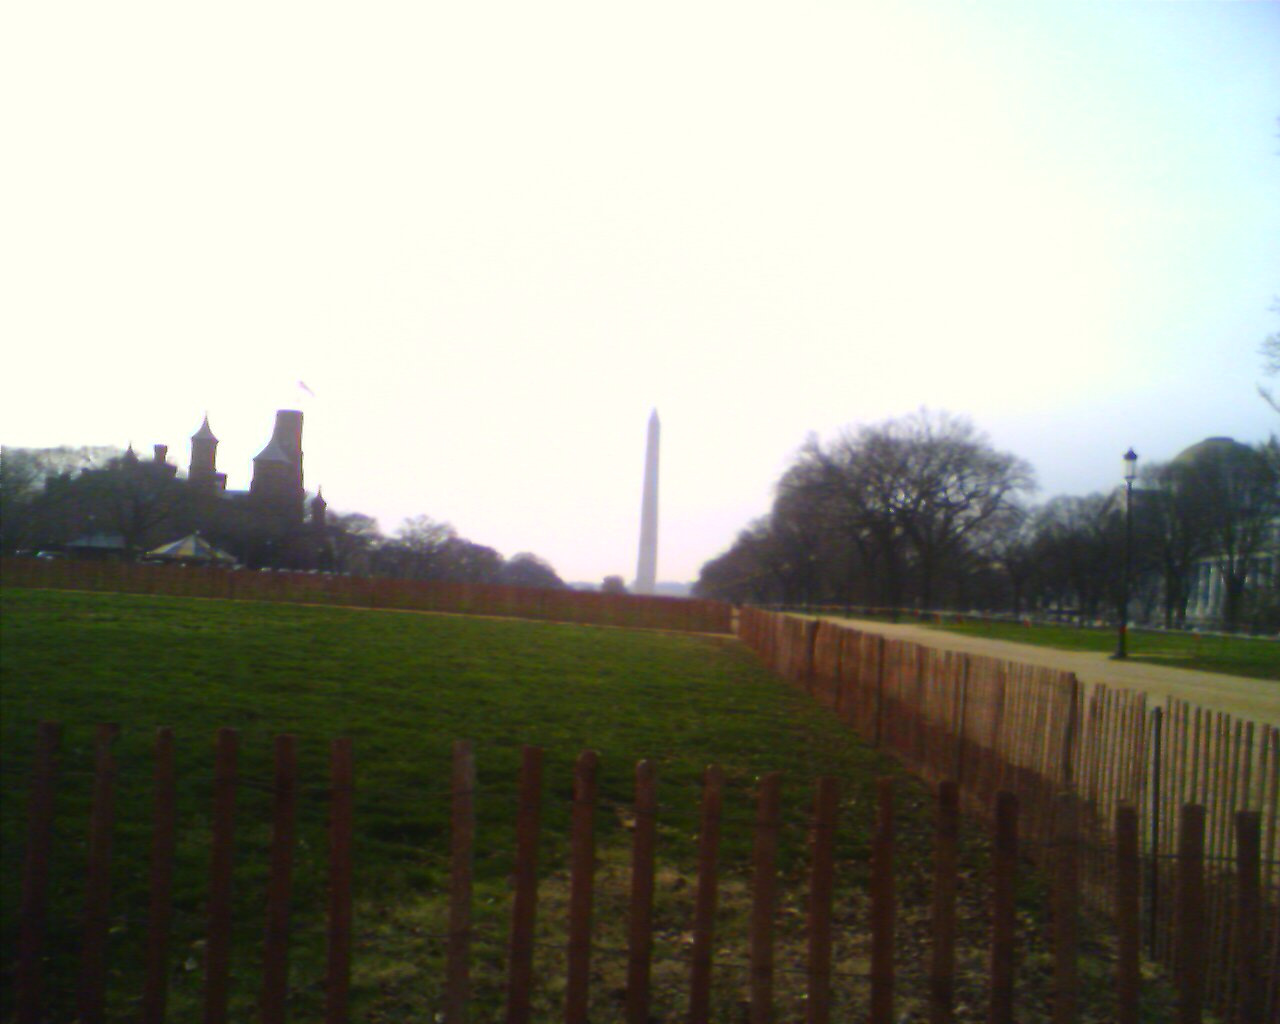 Looking down the mall